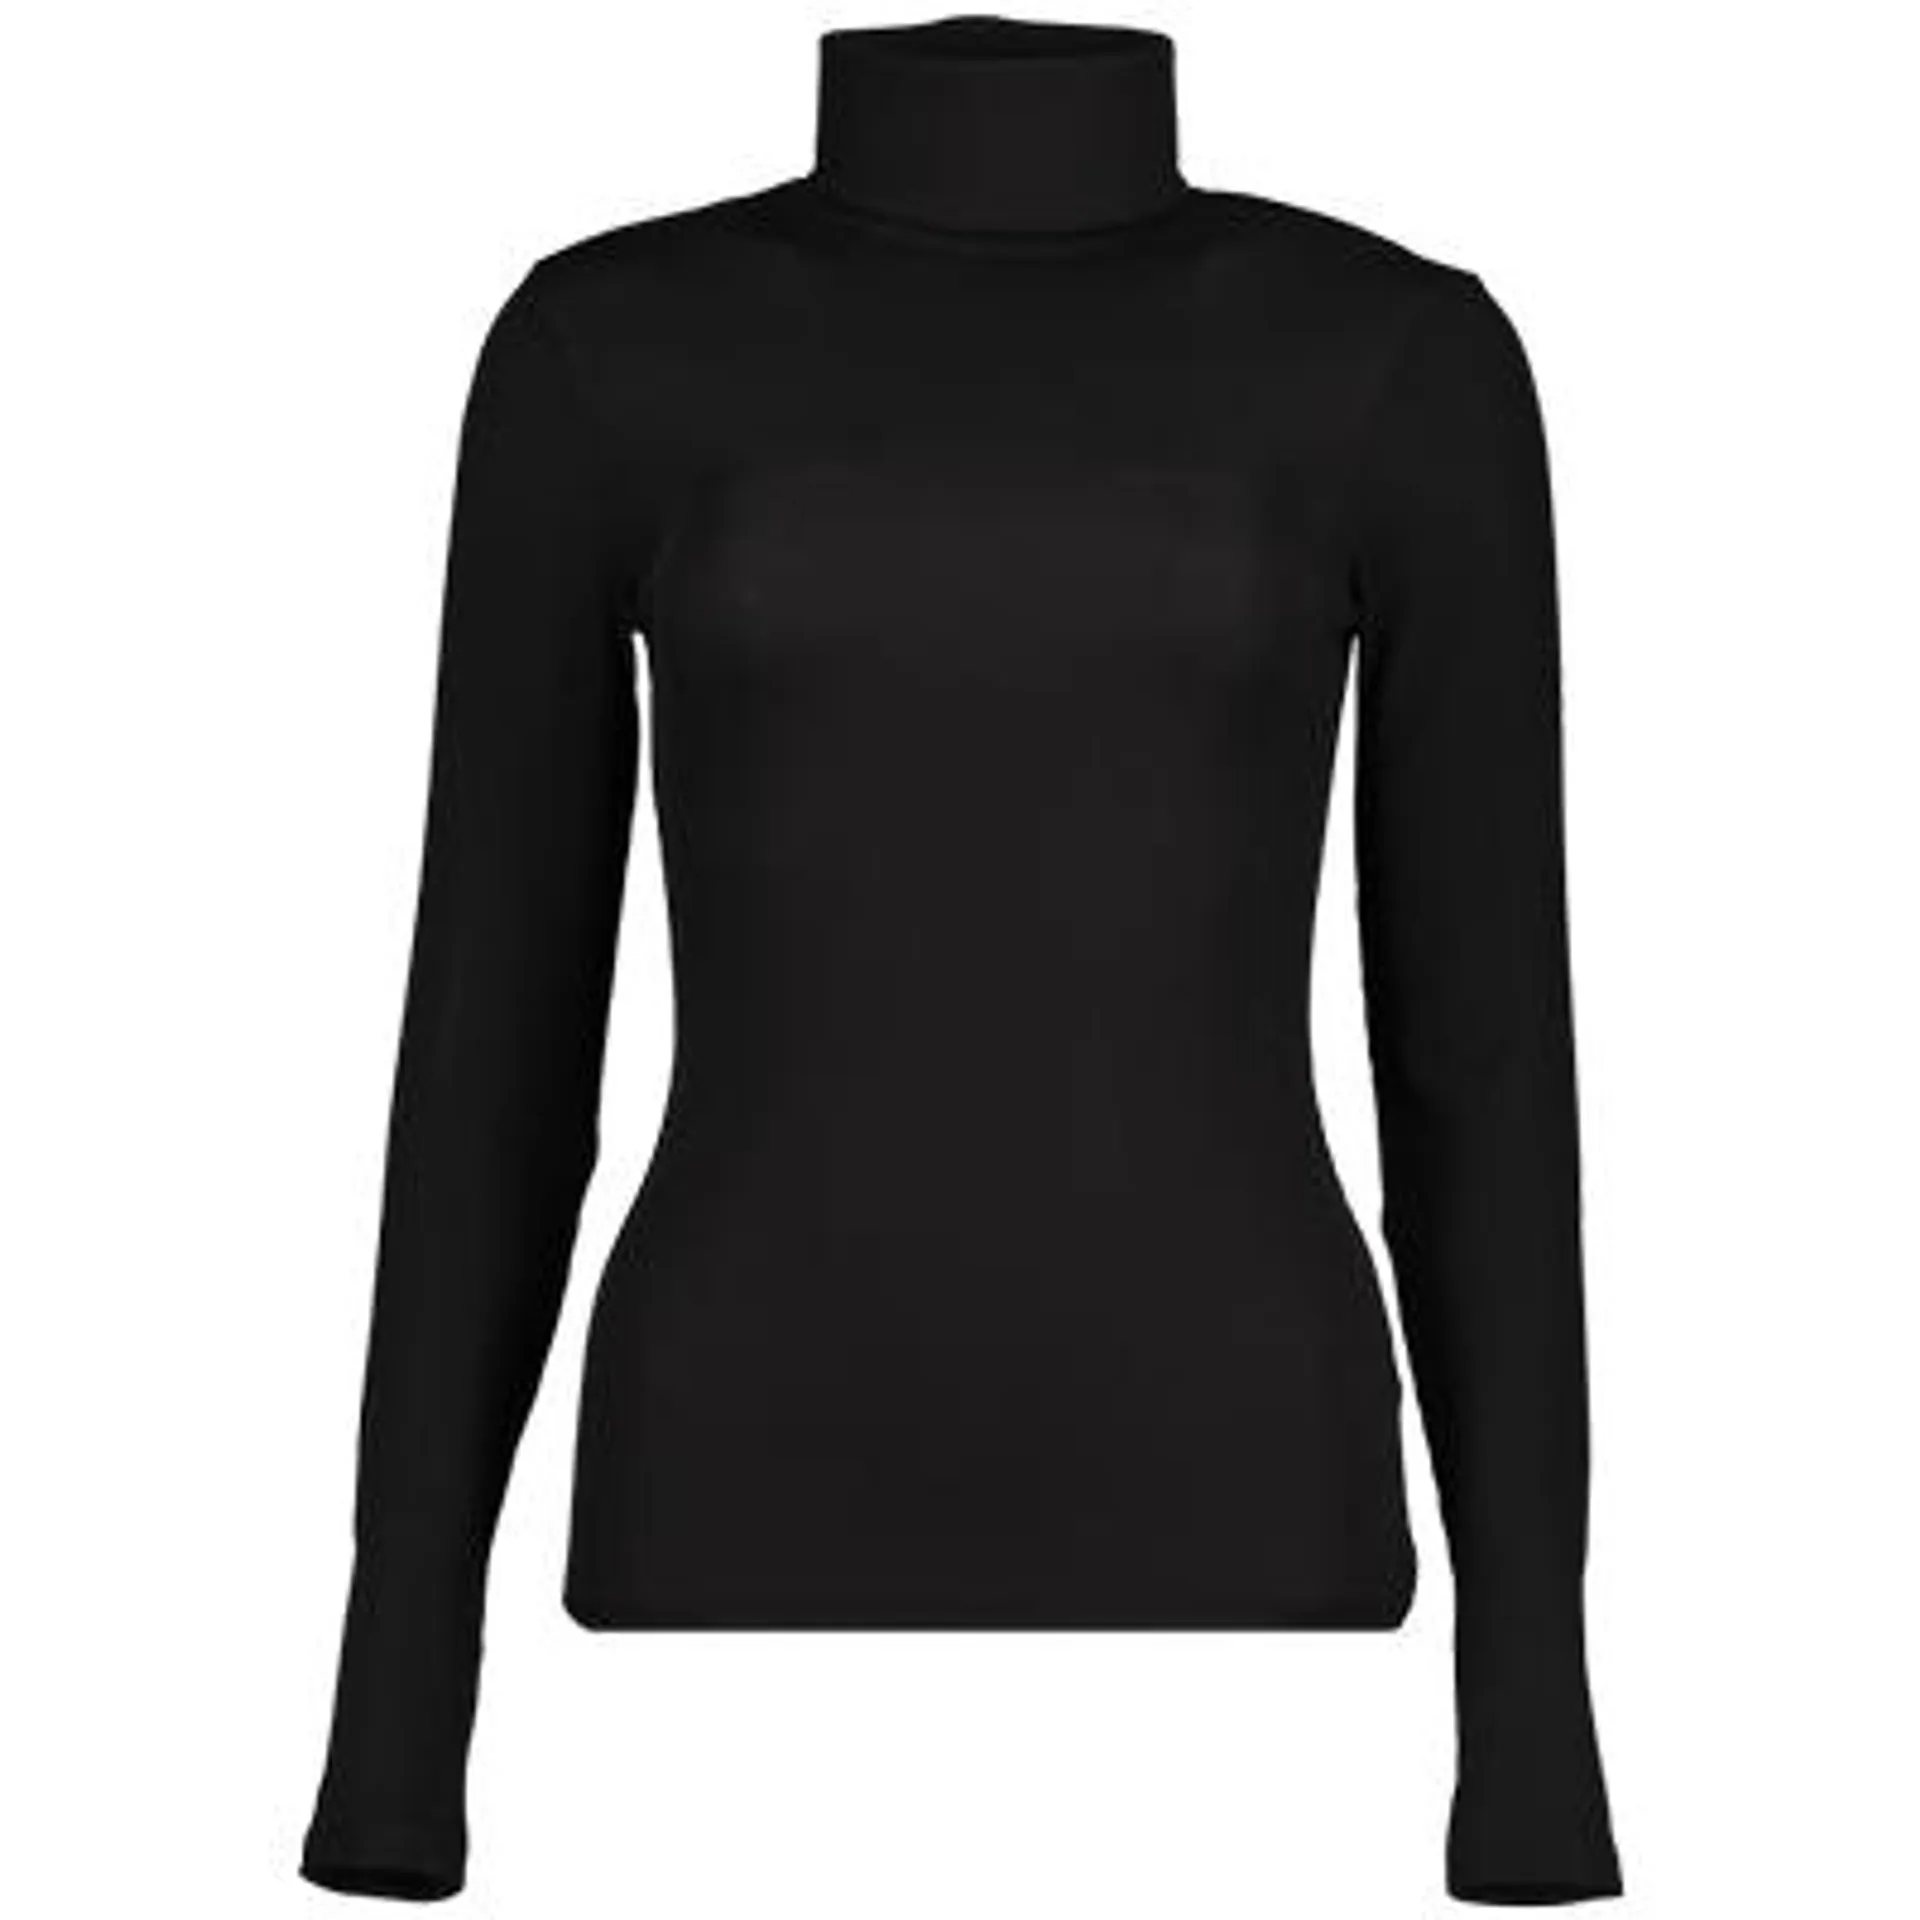 Long sleeve with rollneck